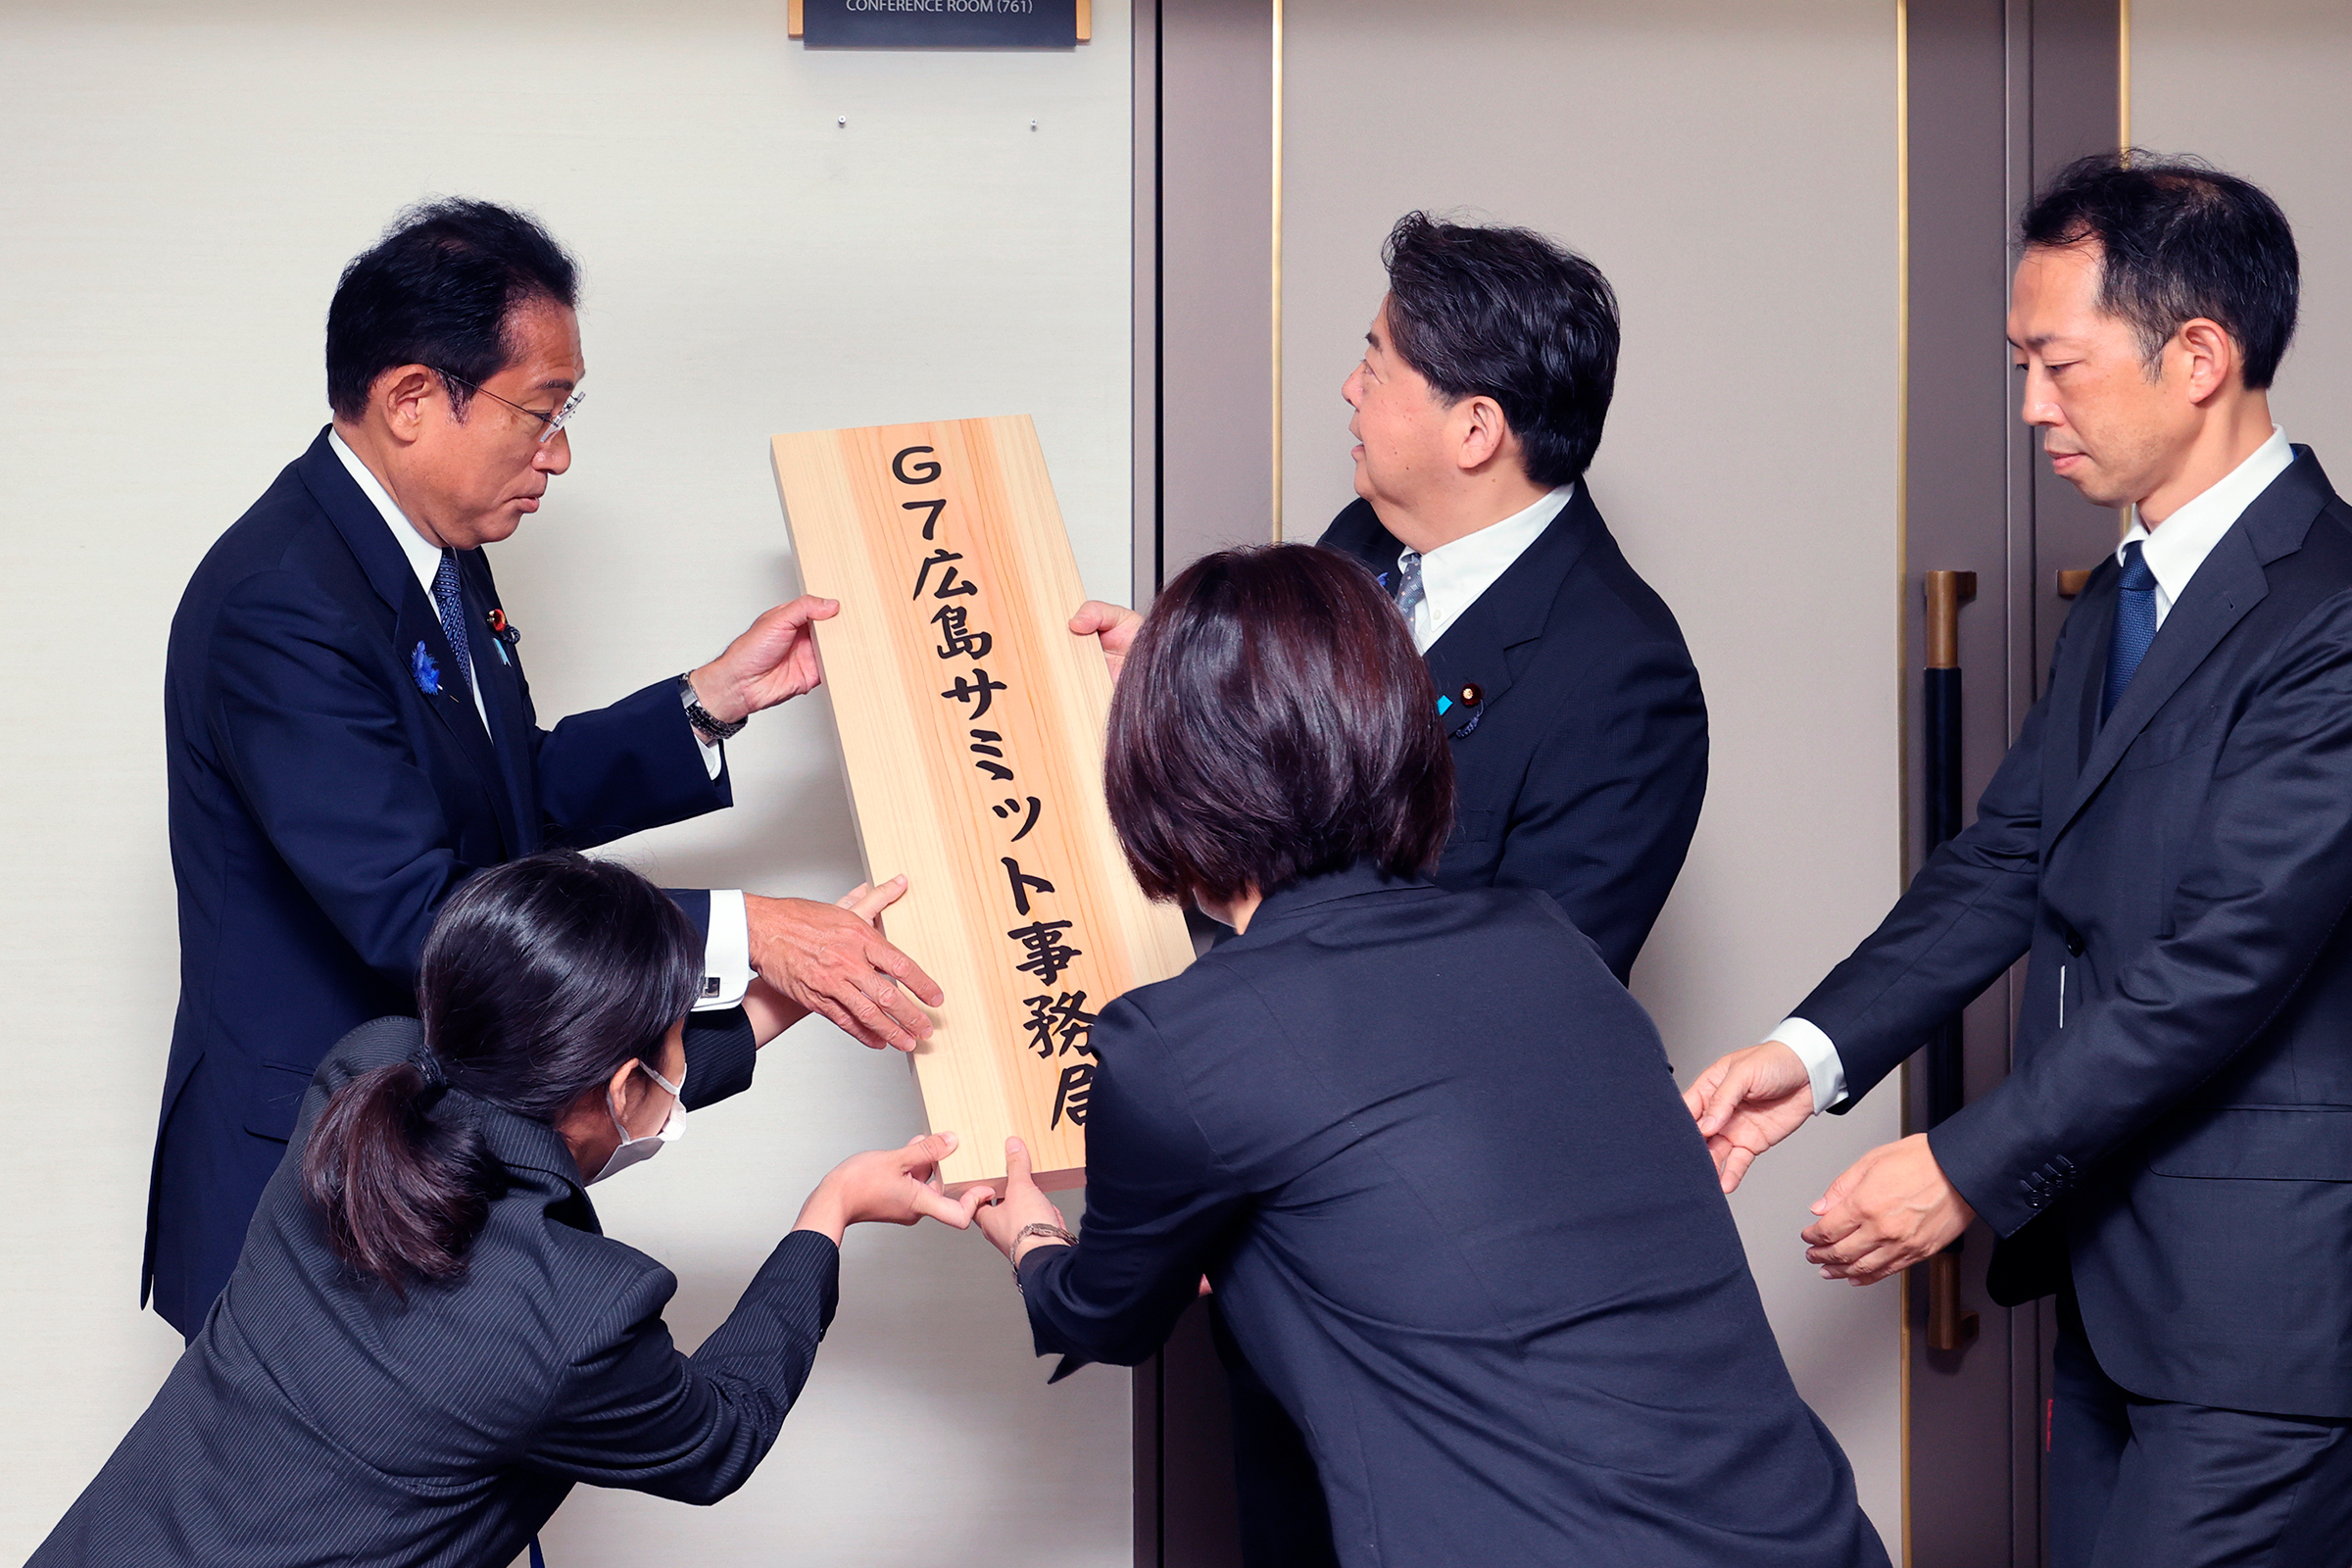 The secretariat of the G7 Summit is set up at the Foreign Ministry in Tokyo on July 15, 2022. Kishida (left), Foreign Minister Yoshimasa Hayashi (center), and Secretary General Katsuro Kitagawa hang the signboard in front of its room. (The Yomiuri Shimbun/AP)